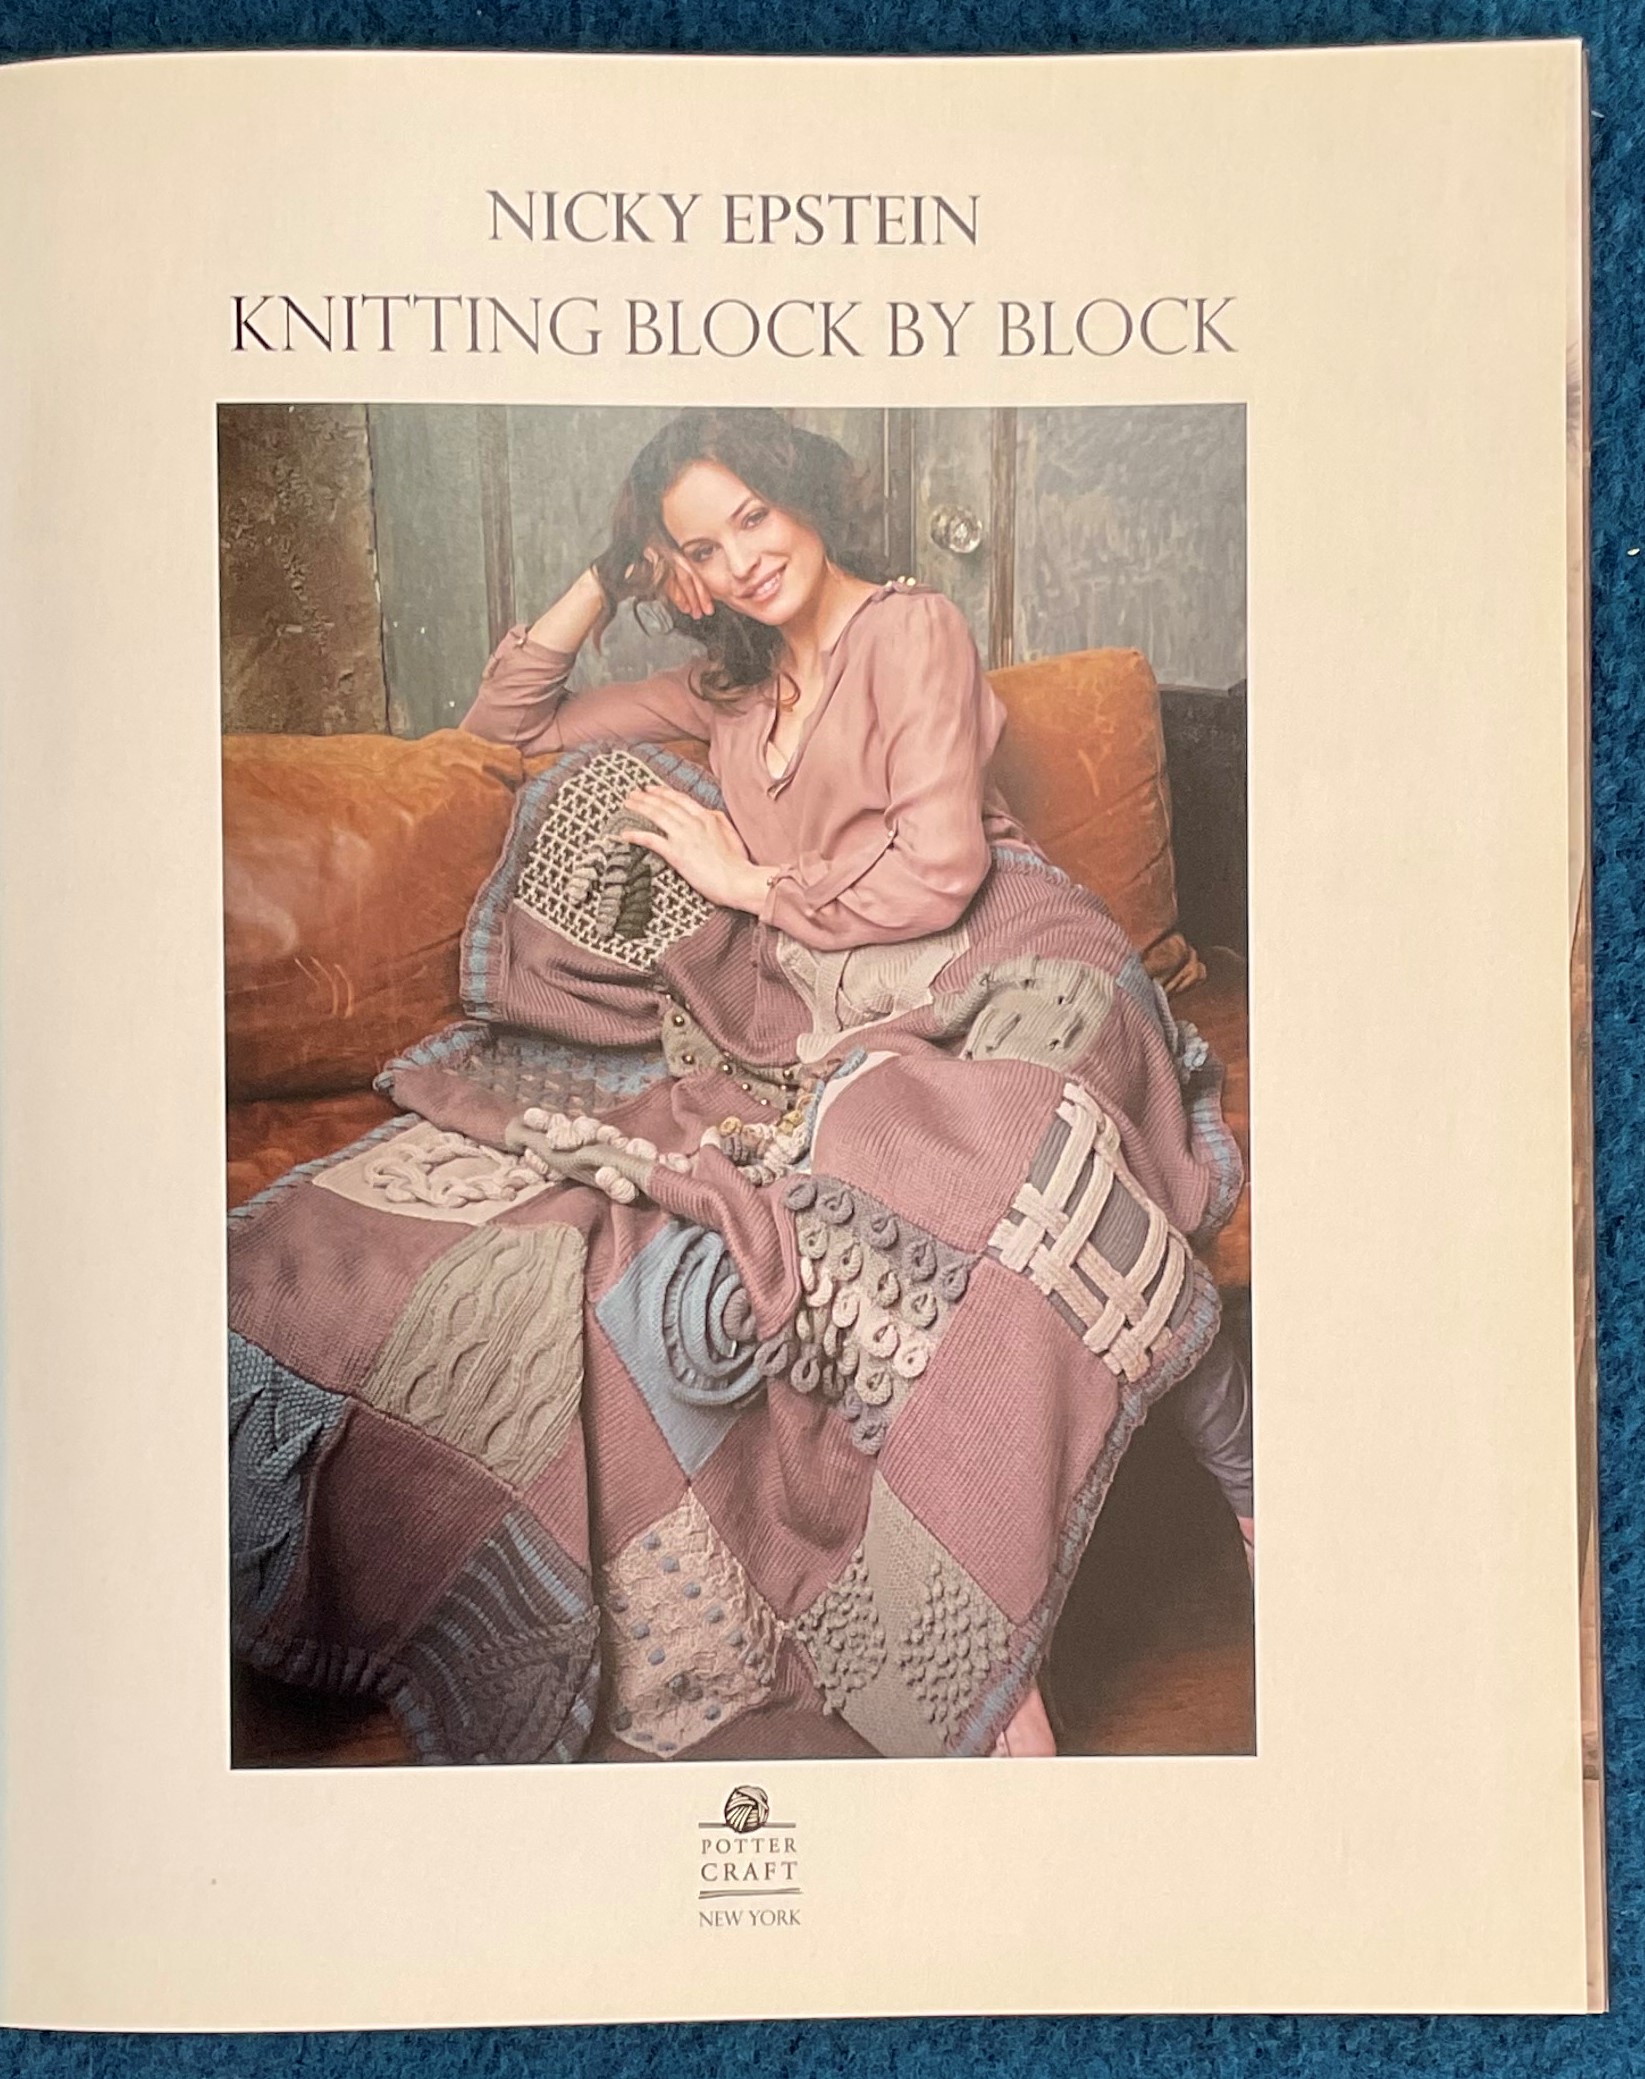 Knitting Block by Block by Nicky Epstein Hardback Book 2010 First Edition published by Potter - Image 2 of 3